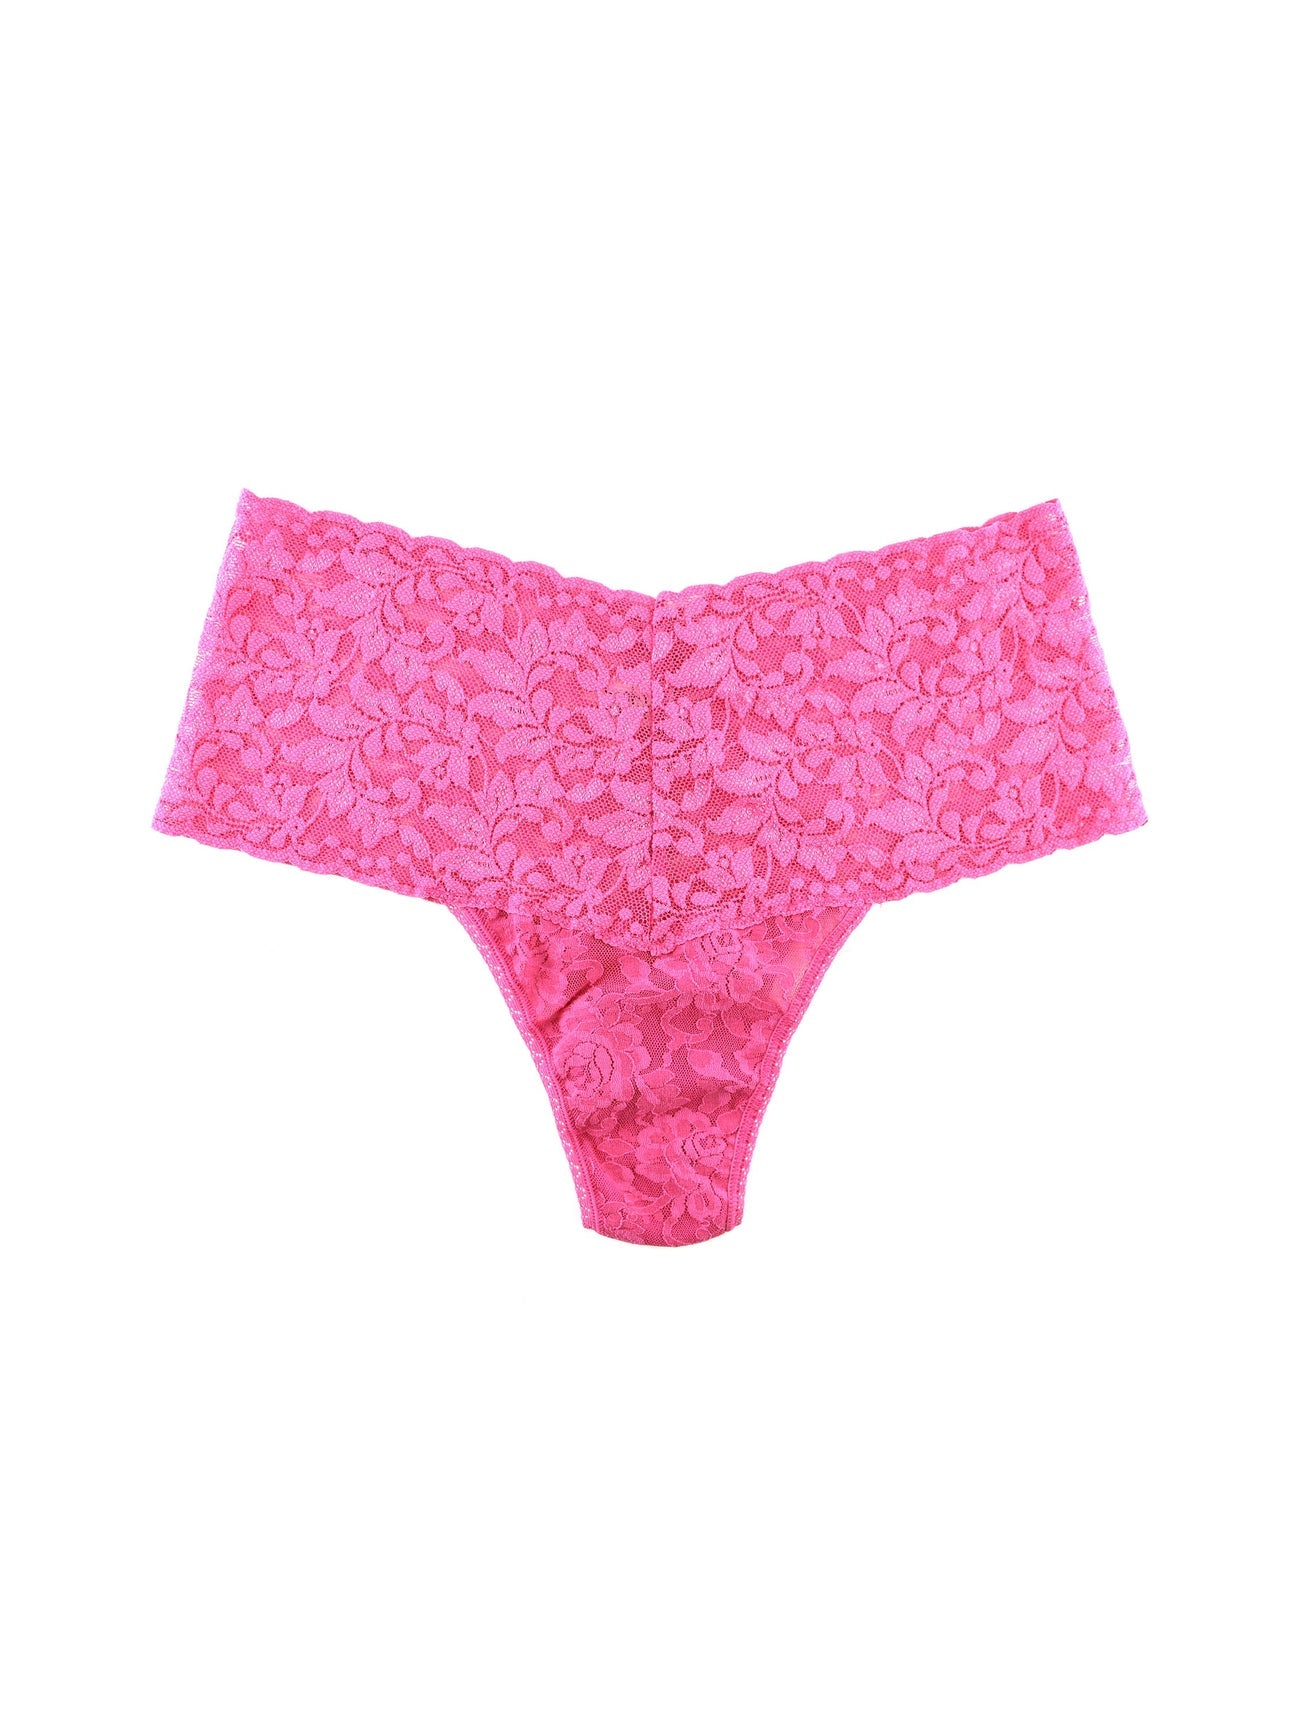 VS pink all over lace Cheekster Panty BRAND NEW SIZE Nigeria